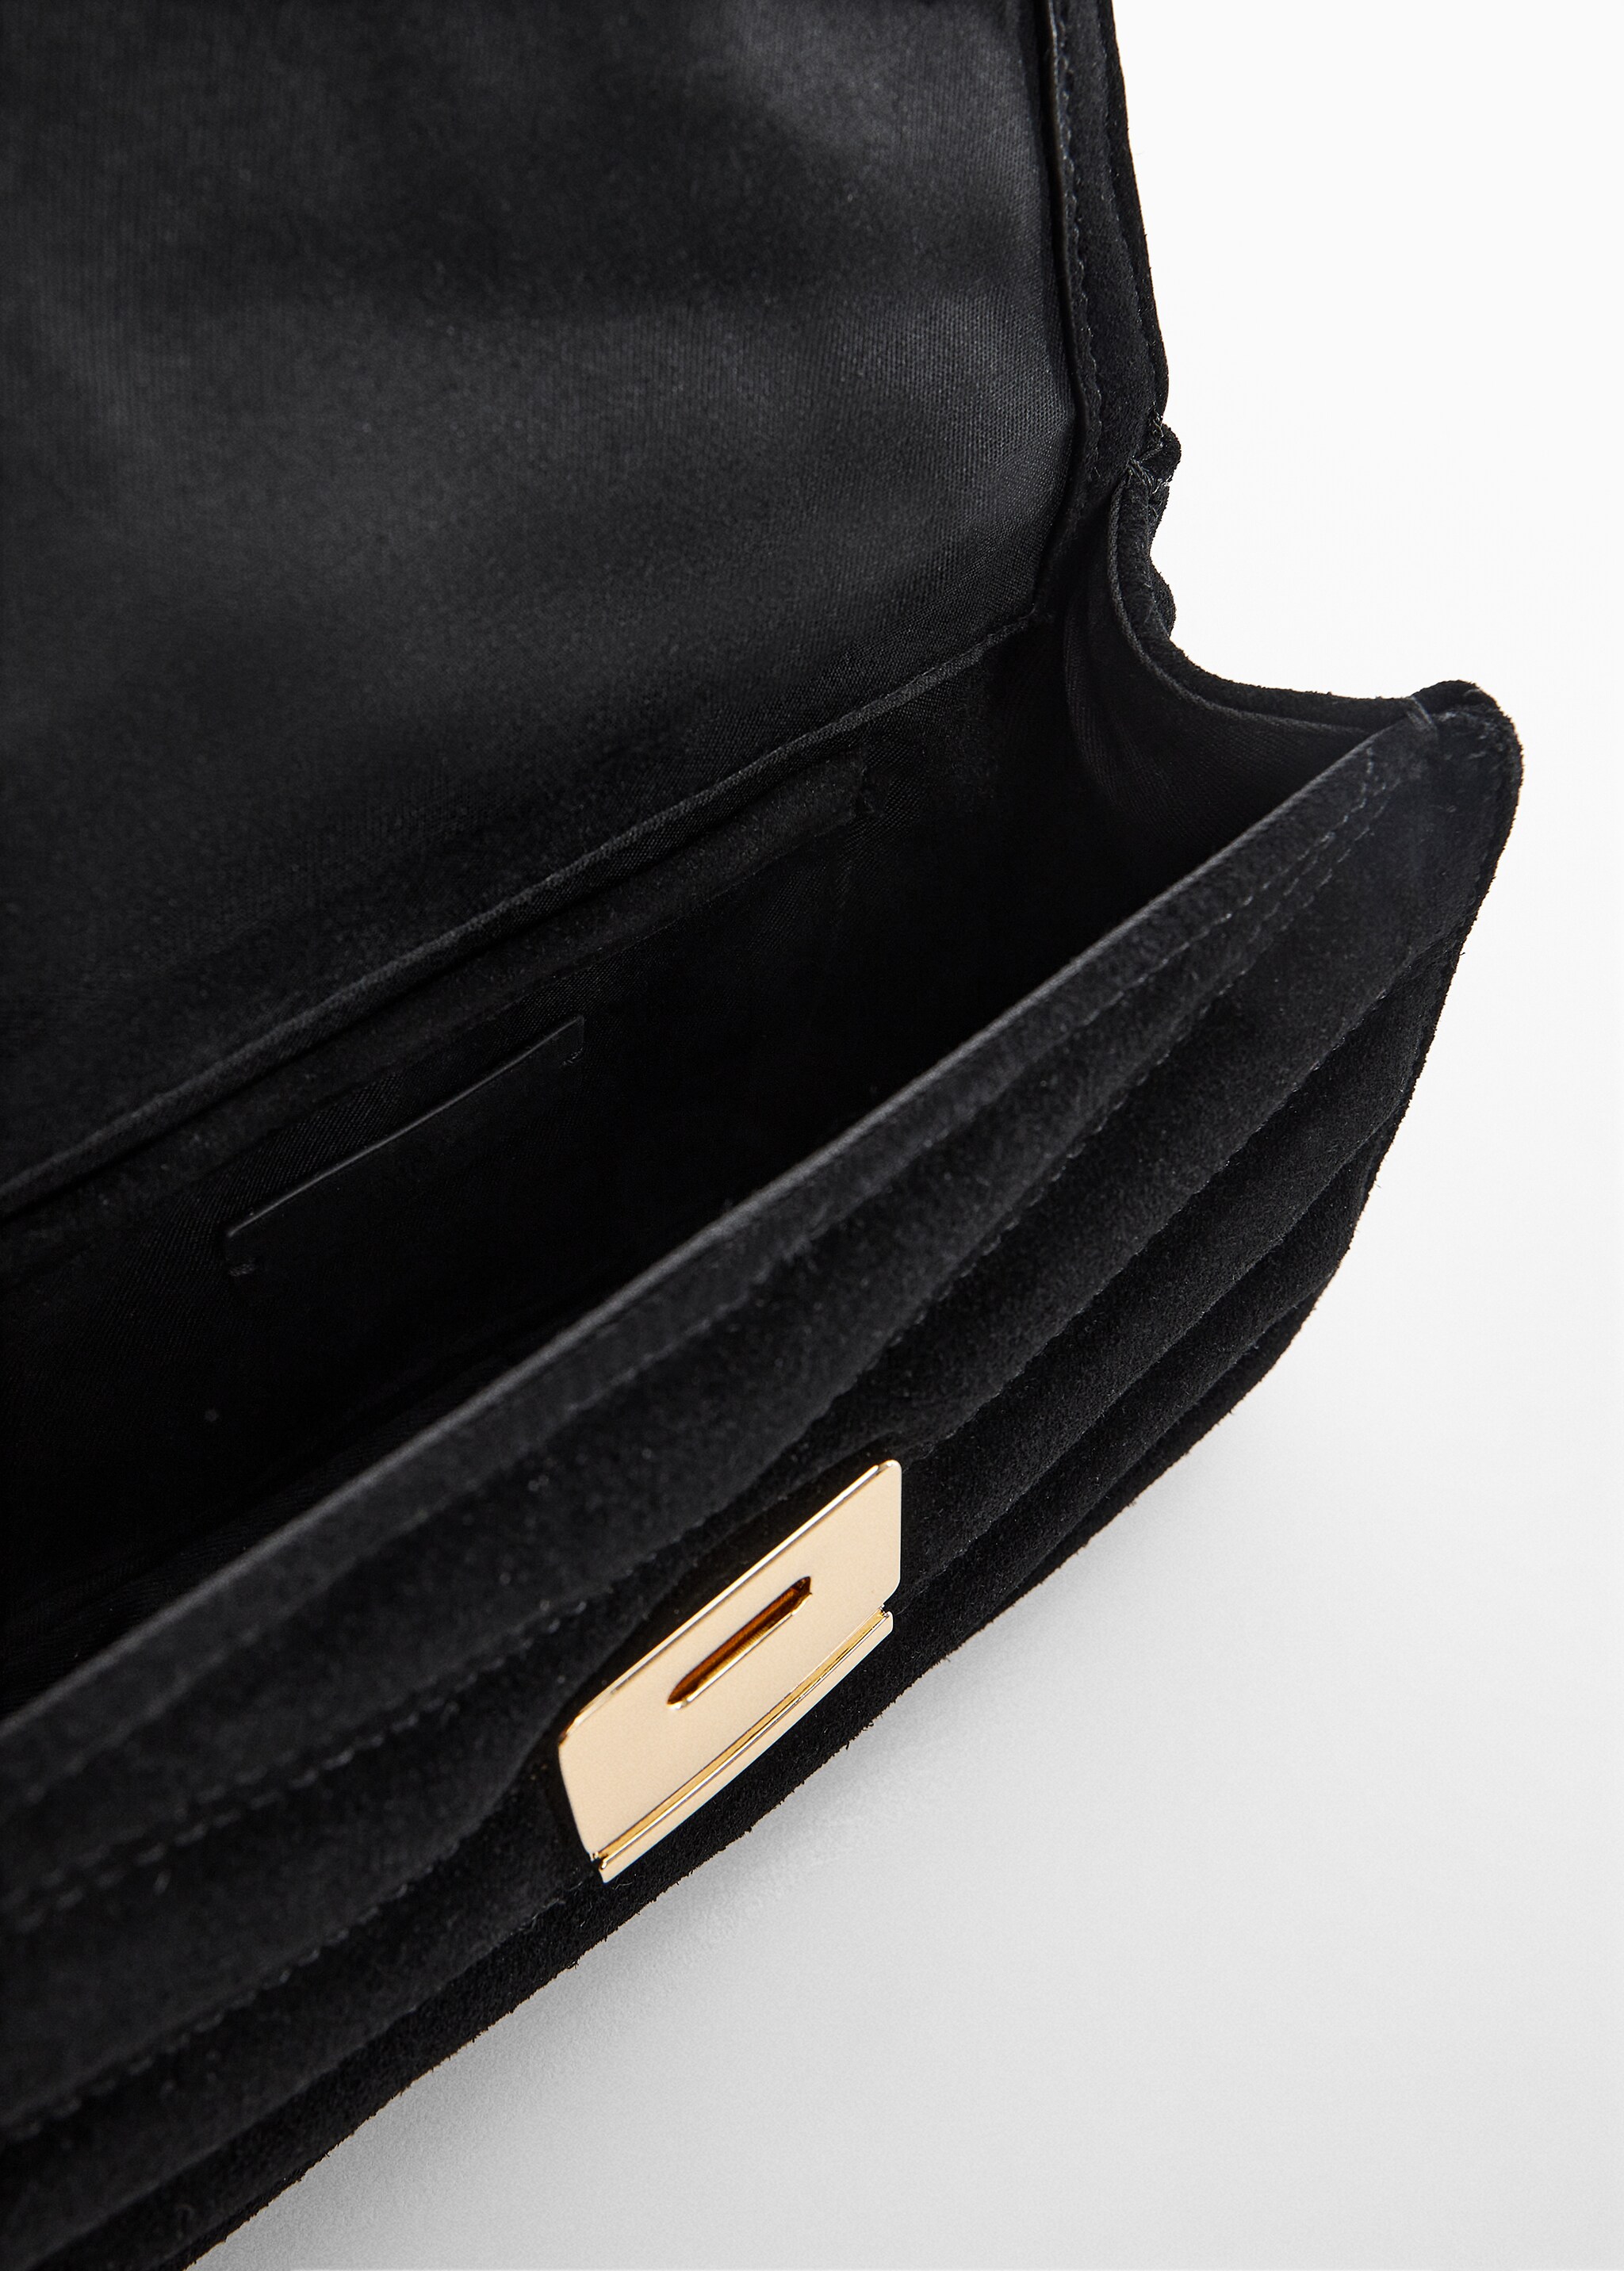 Chain leather bag - Details of the article 1